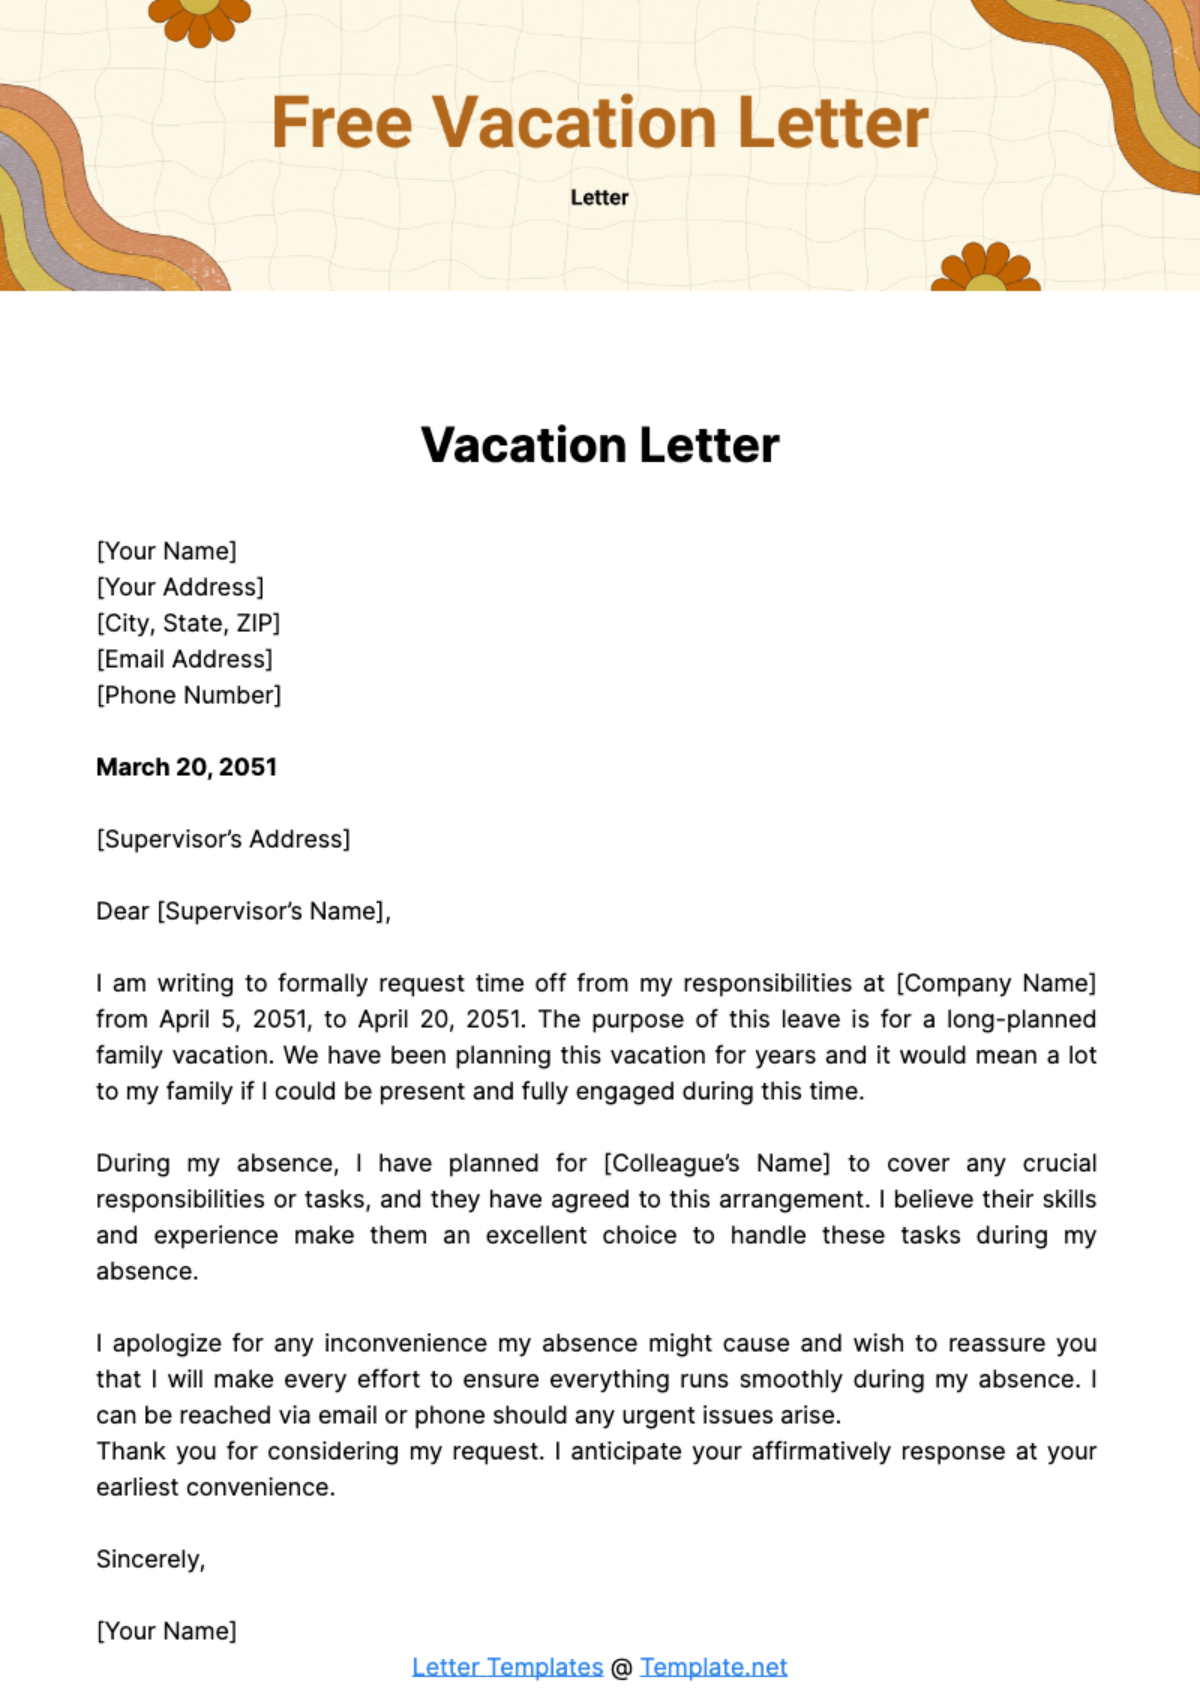 Free Vacation Letter Template